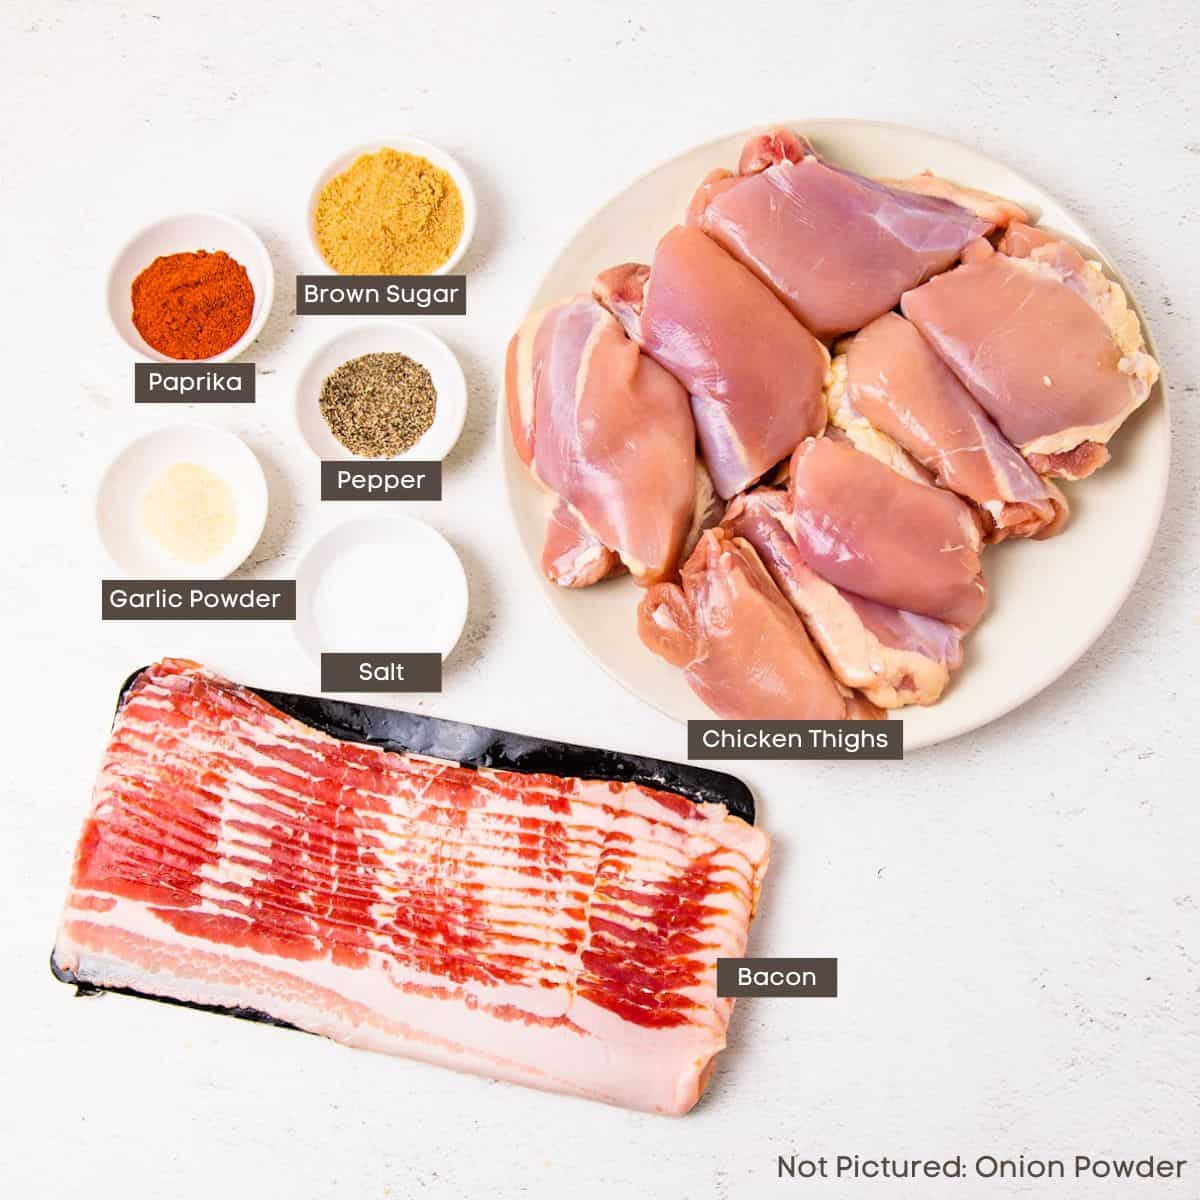 Ingredients for bacon wrapped chicken thighs shown arranged on a countertop.